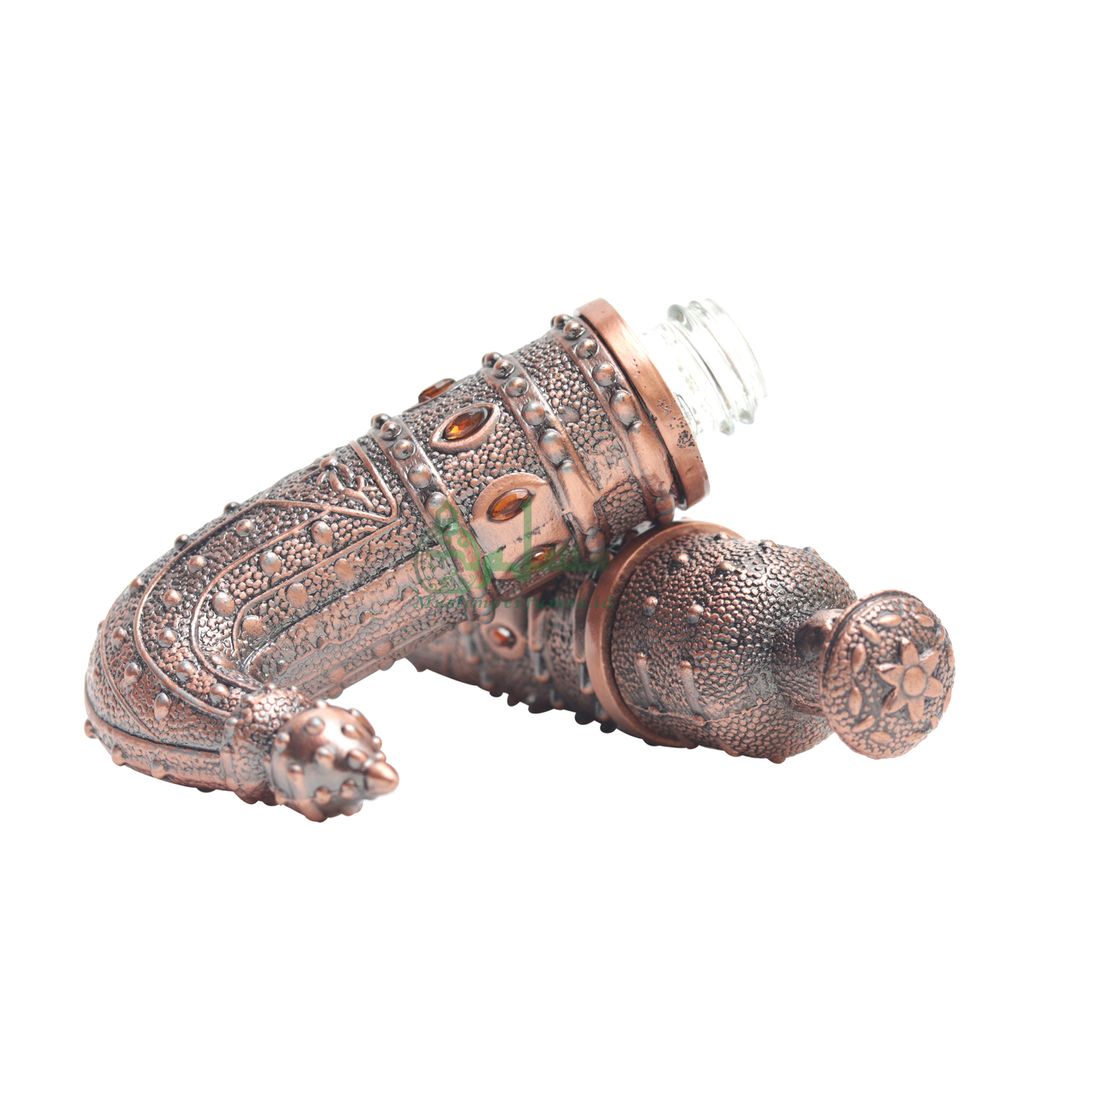 EMPTY PERFUME BOTTLE Small Yemeni Dagger Jambiyya Red Bronze Color Attar Oud Musk Glass 5ml Vial Bejeweled Blue Accents Dipper Applicator